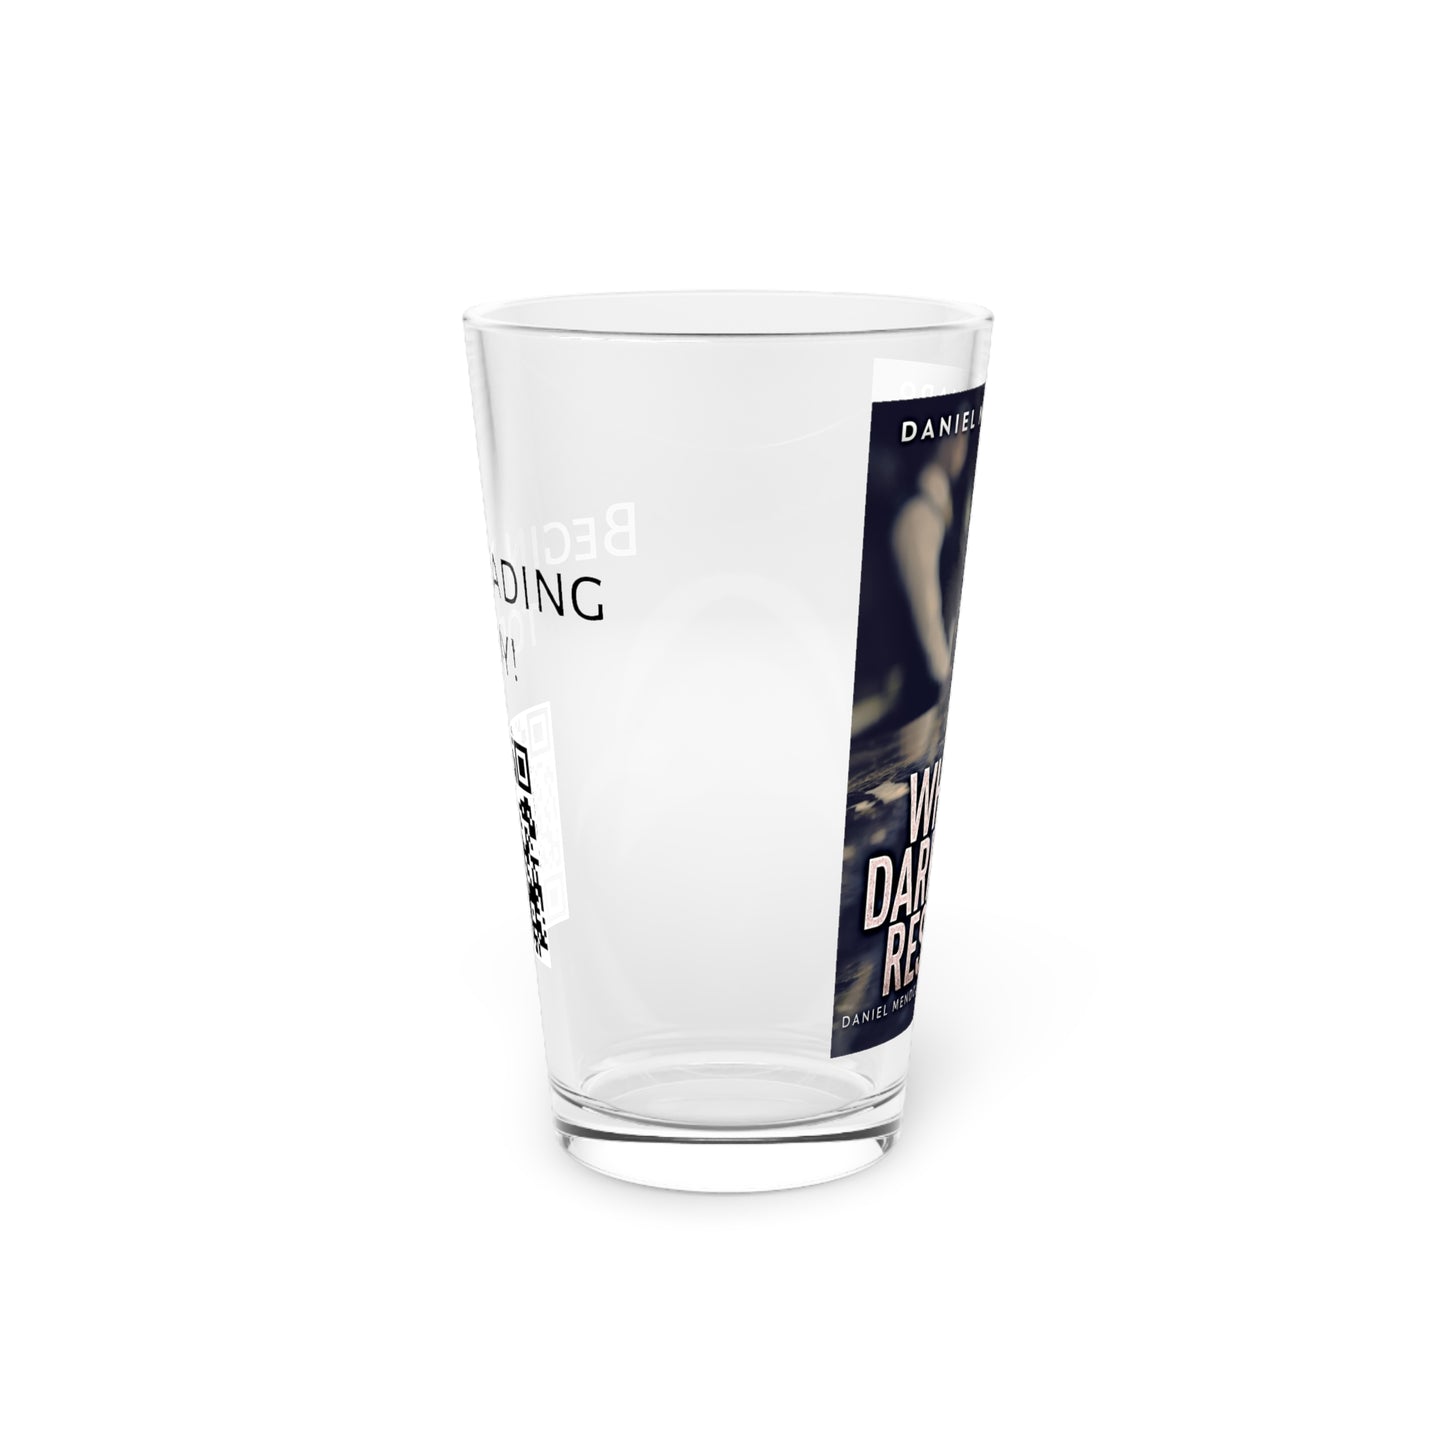 Where Darkness Resides - Pint Glass